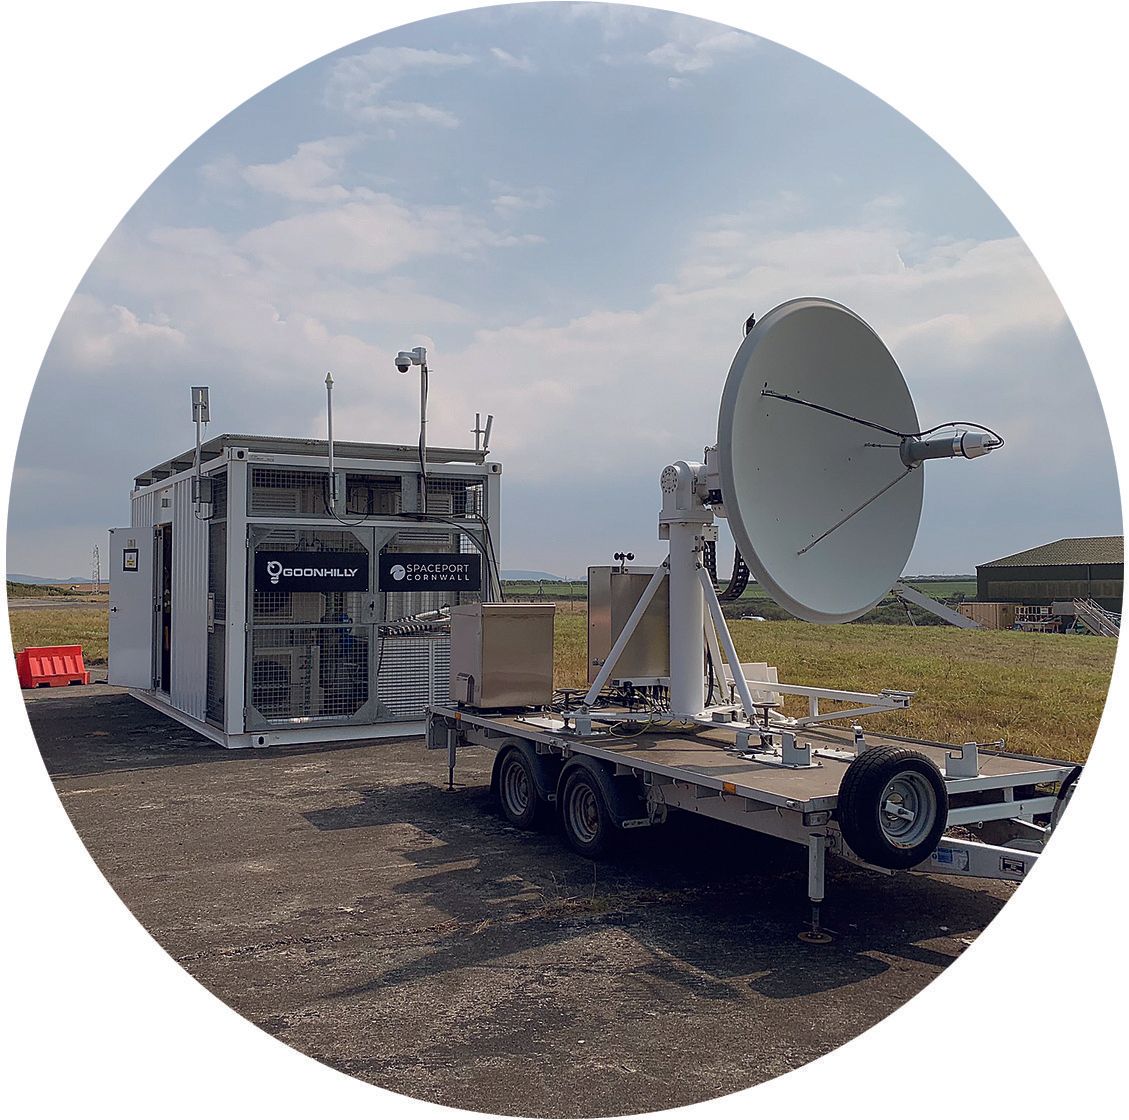 Image of GHY-3 Antenna at Goonhilly Earth Station Ltd